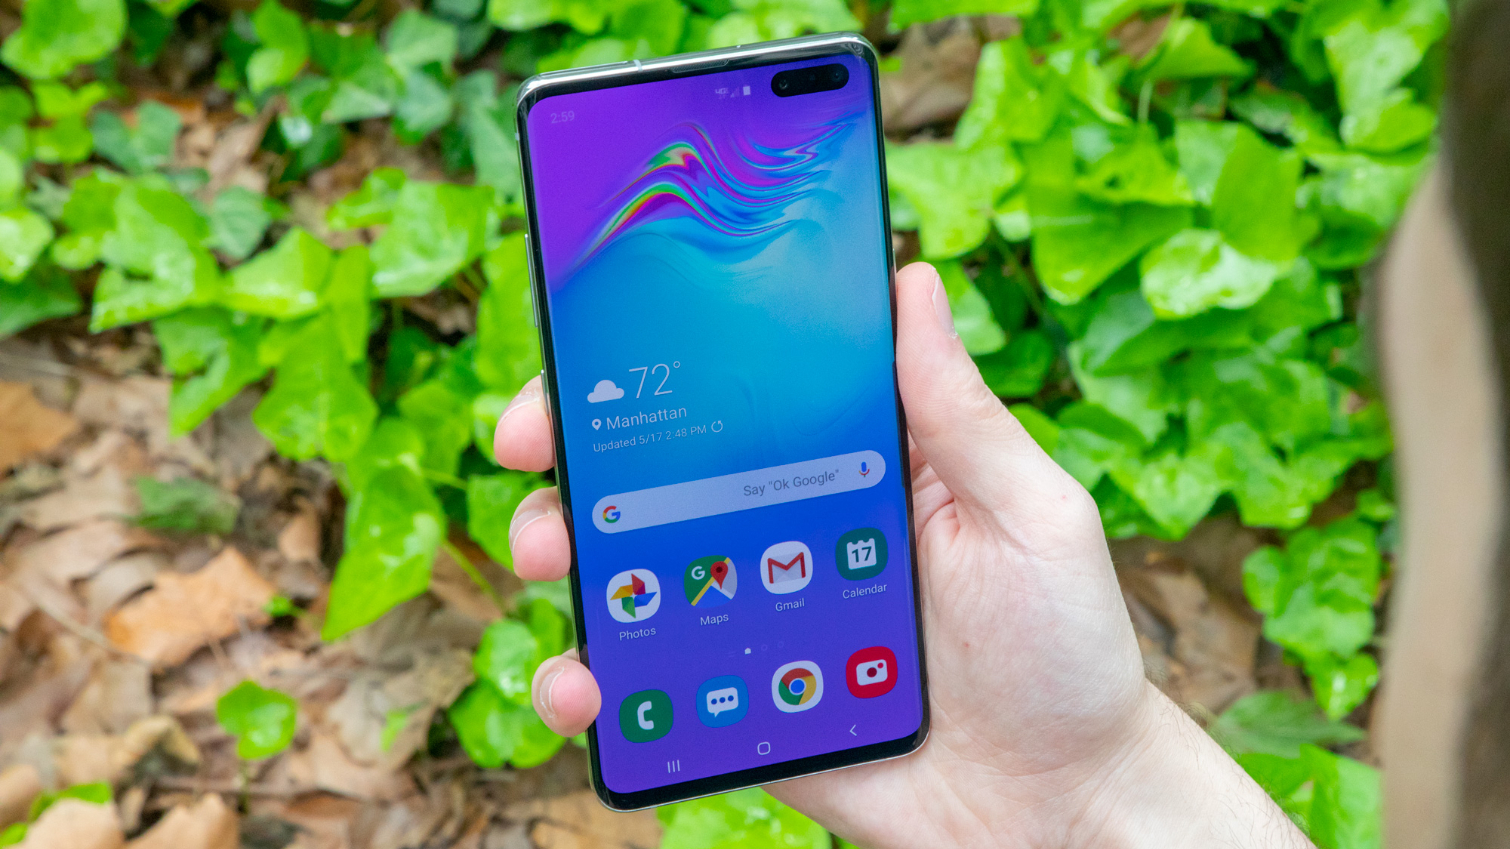 Samsung Galaxy S10 5G Review | Tom's Guide